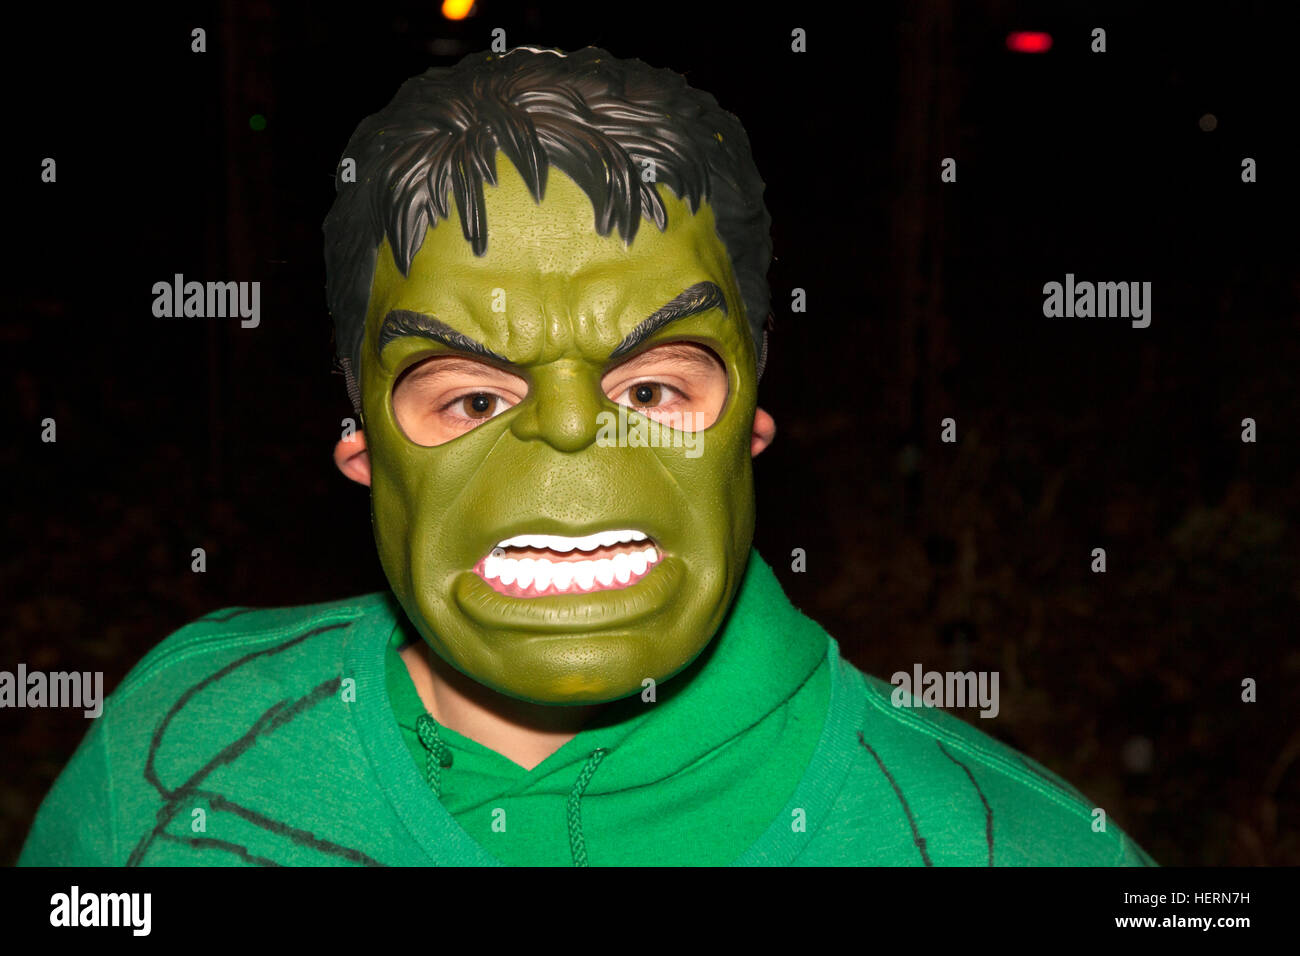 The Incredible Hulk a Marvel Comics character by Stan Lee out trick or treating on Halloween. St Paul Minnesota MN USA Stock Photo